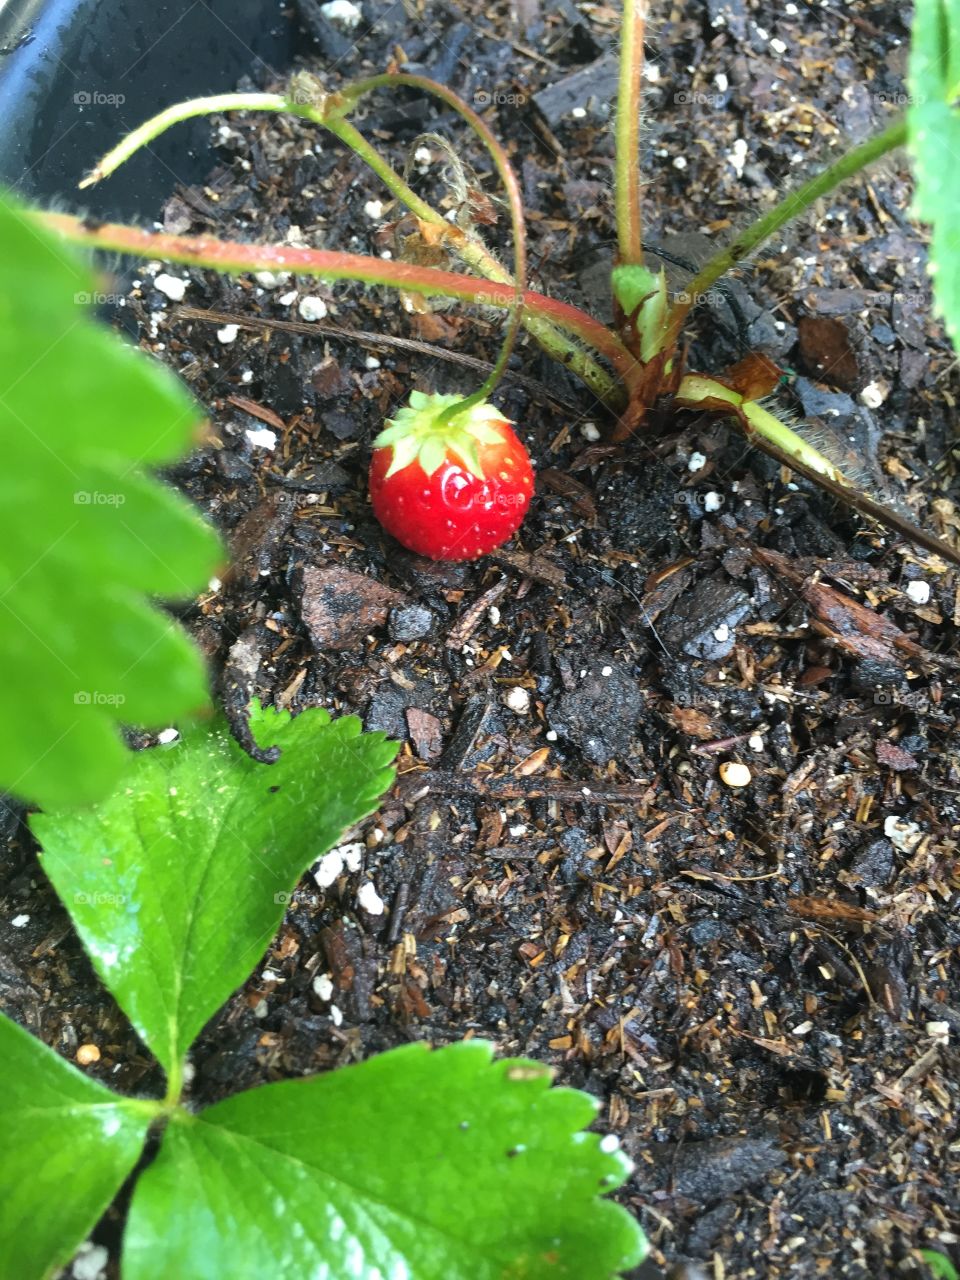 Strawberry from our garden 